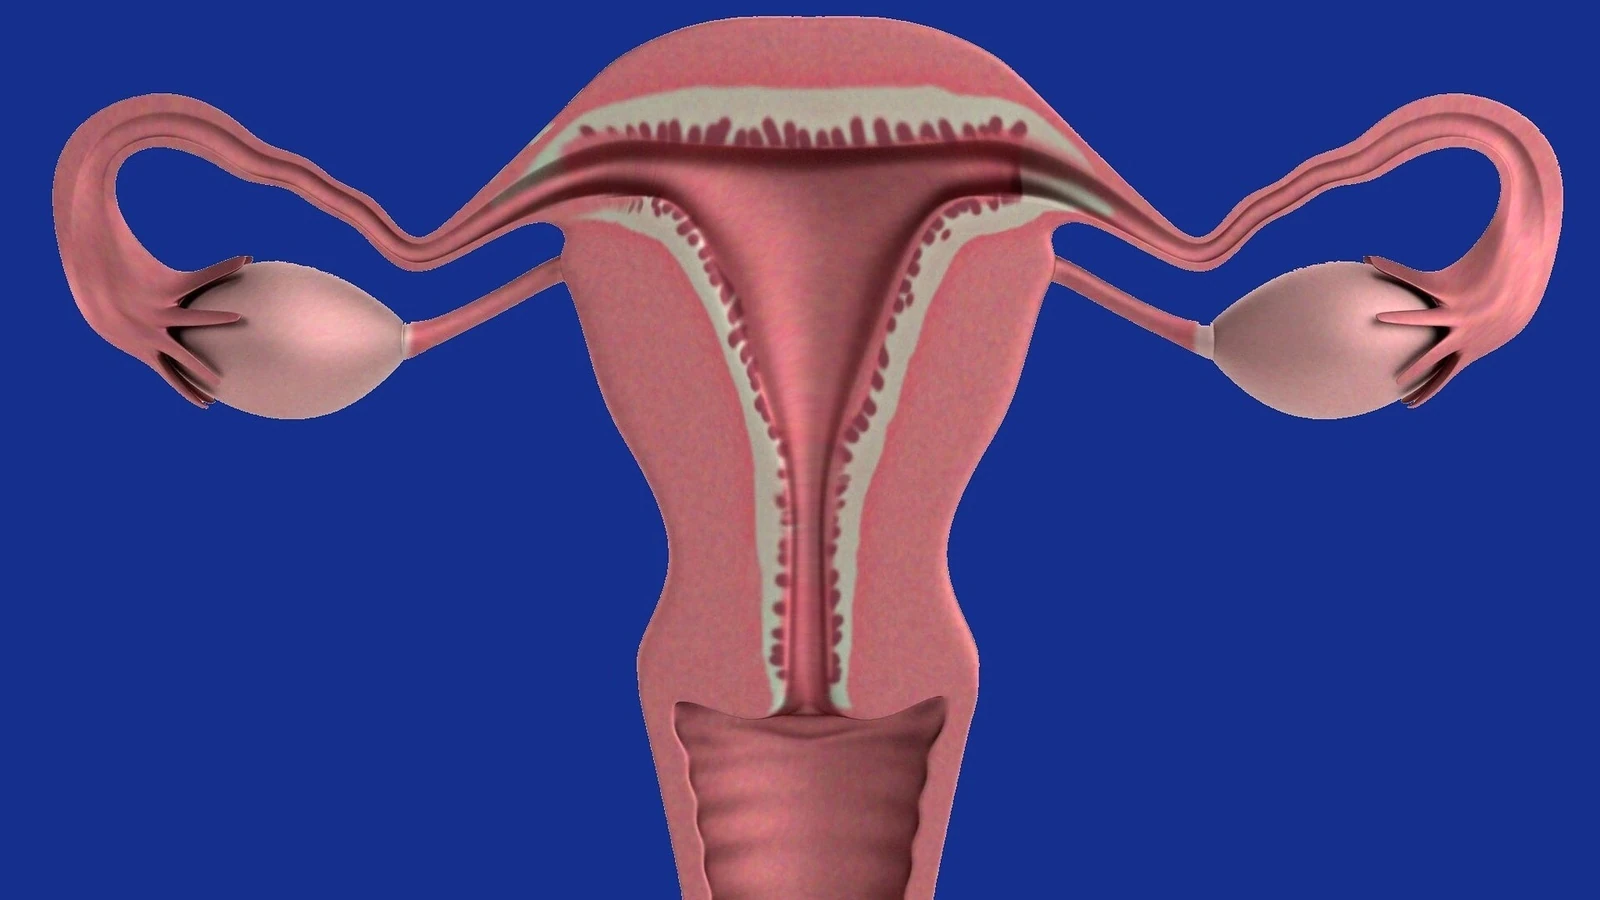 Ovarian cancer: Women should watch out for these warning signs